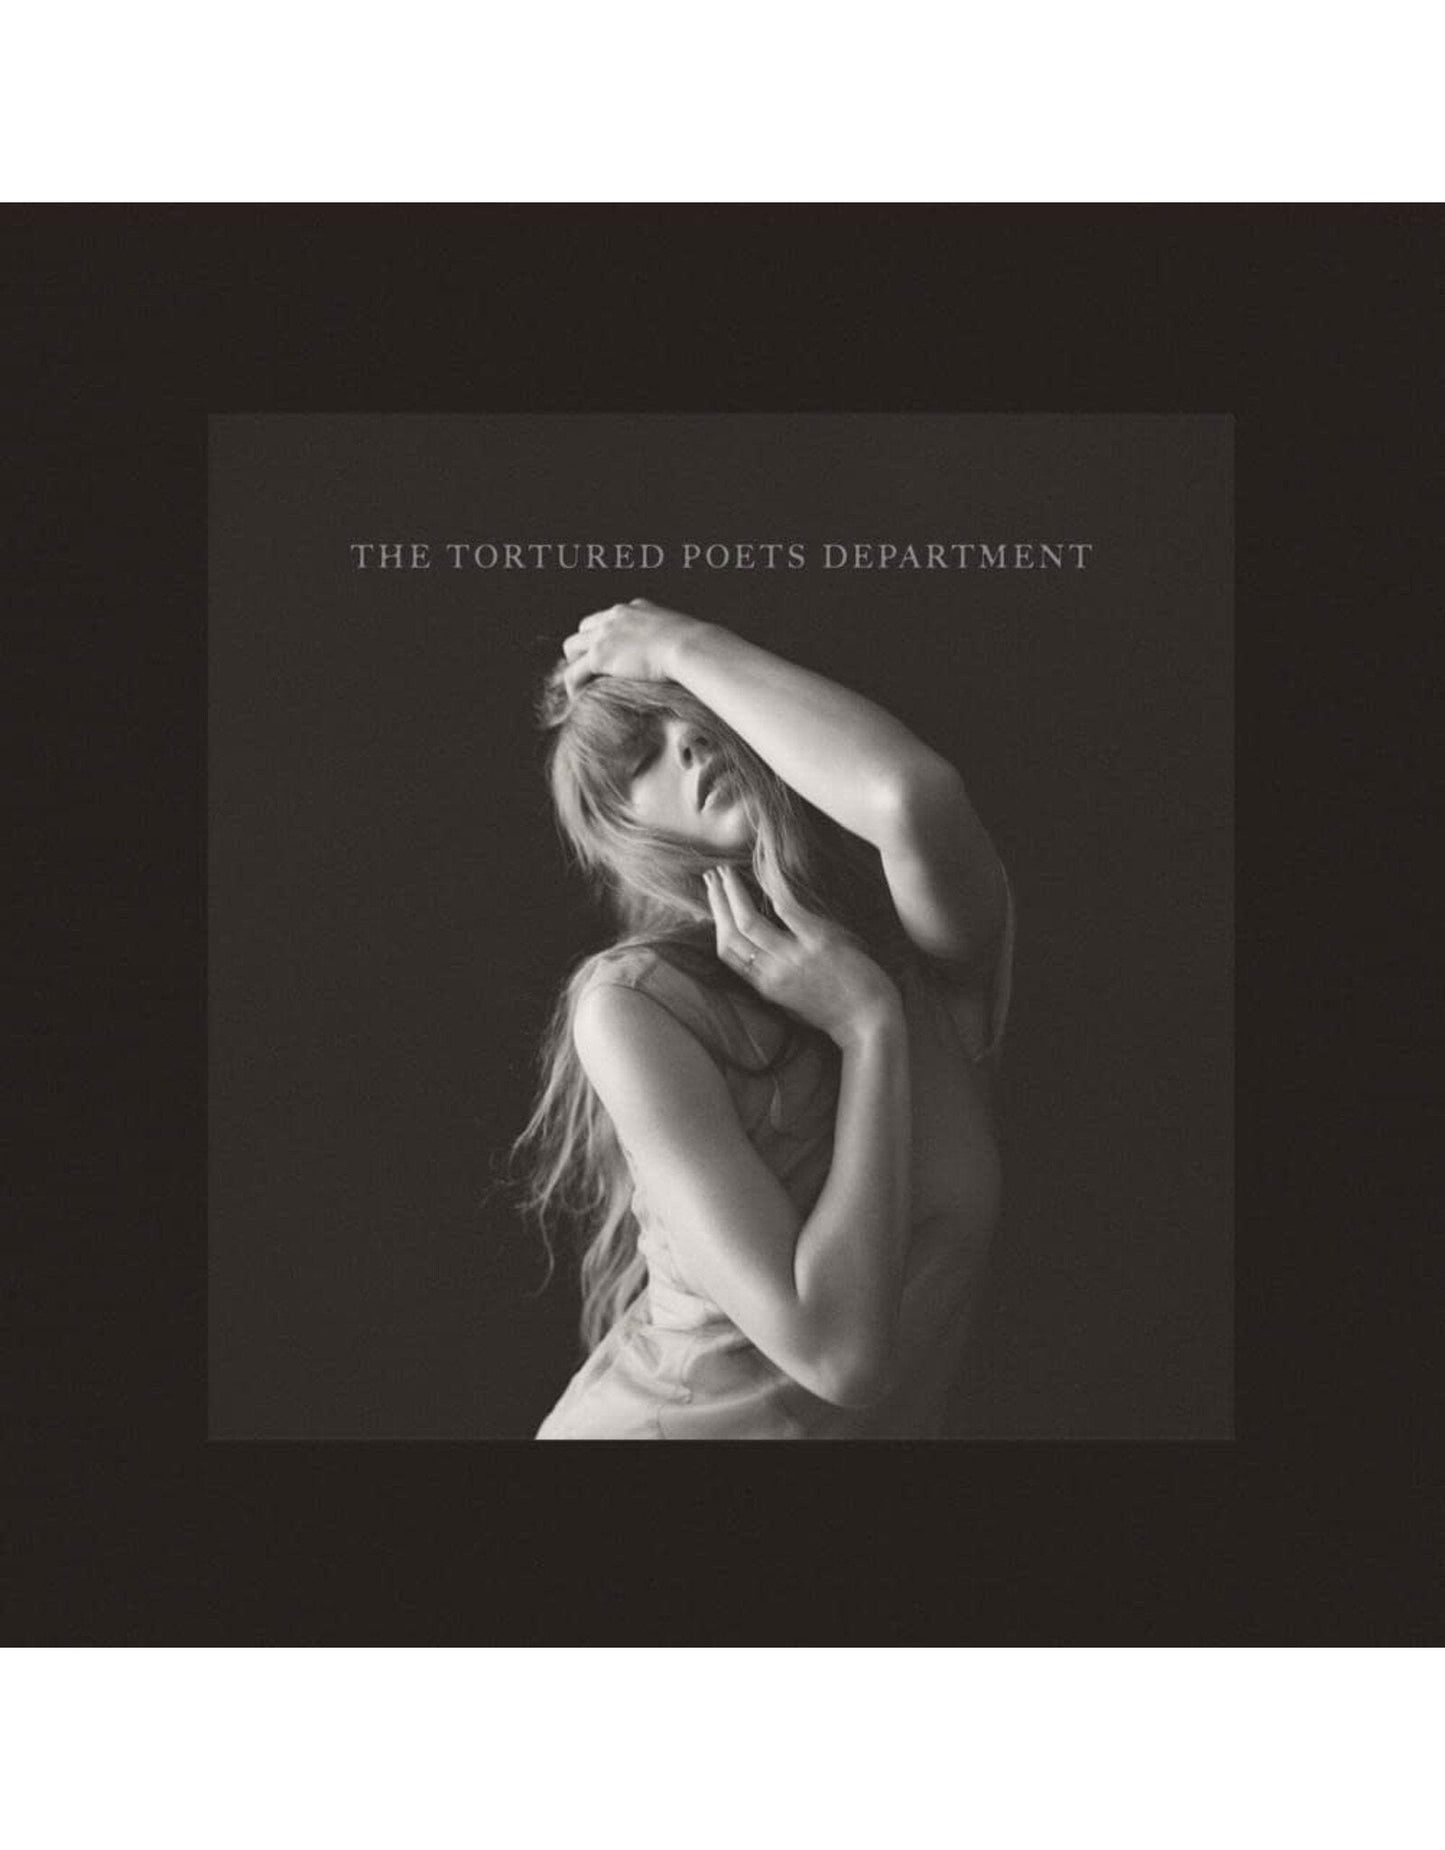 Taylor Swift - The Tortured Poets Department (Limited Edition, Charcoal Black Vinyl) (2 LP)